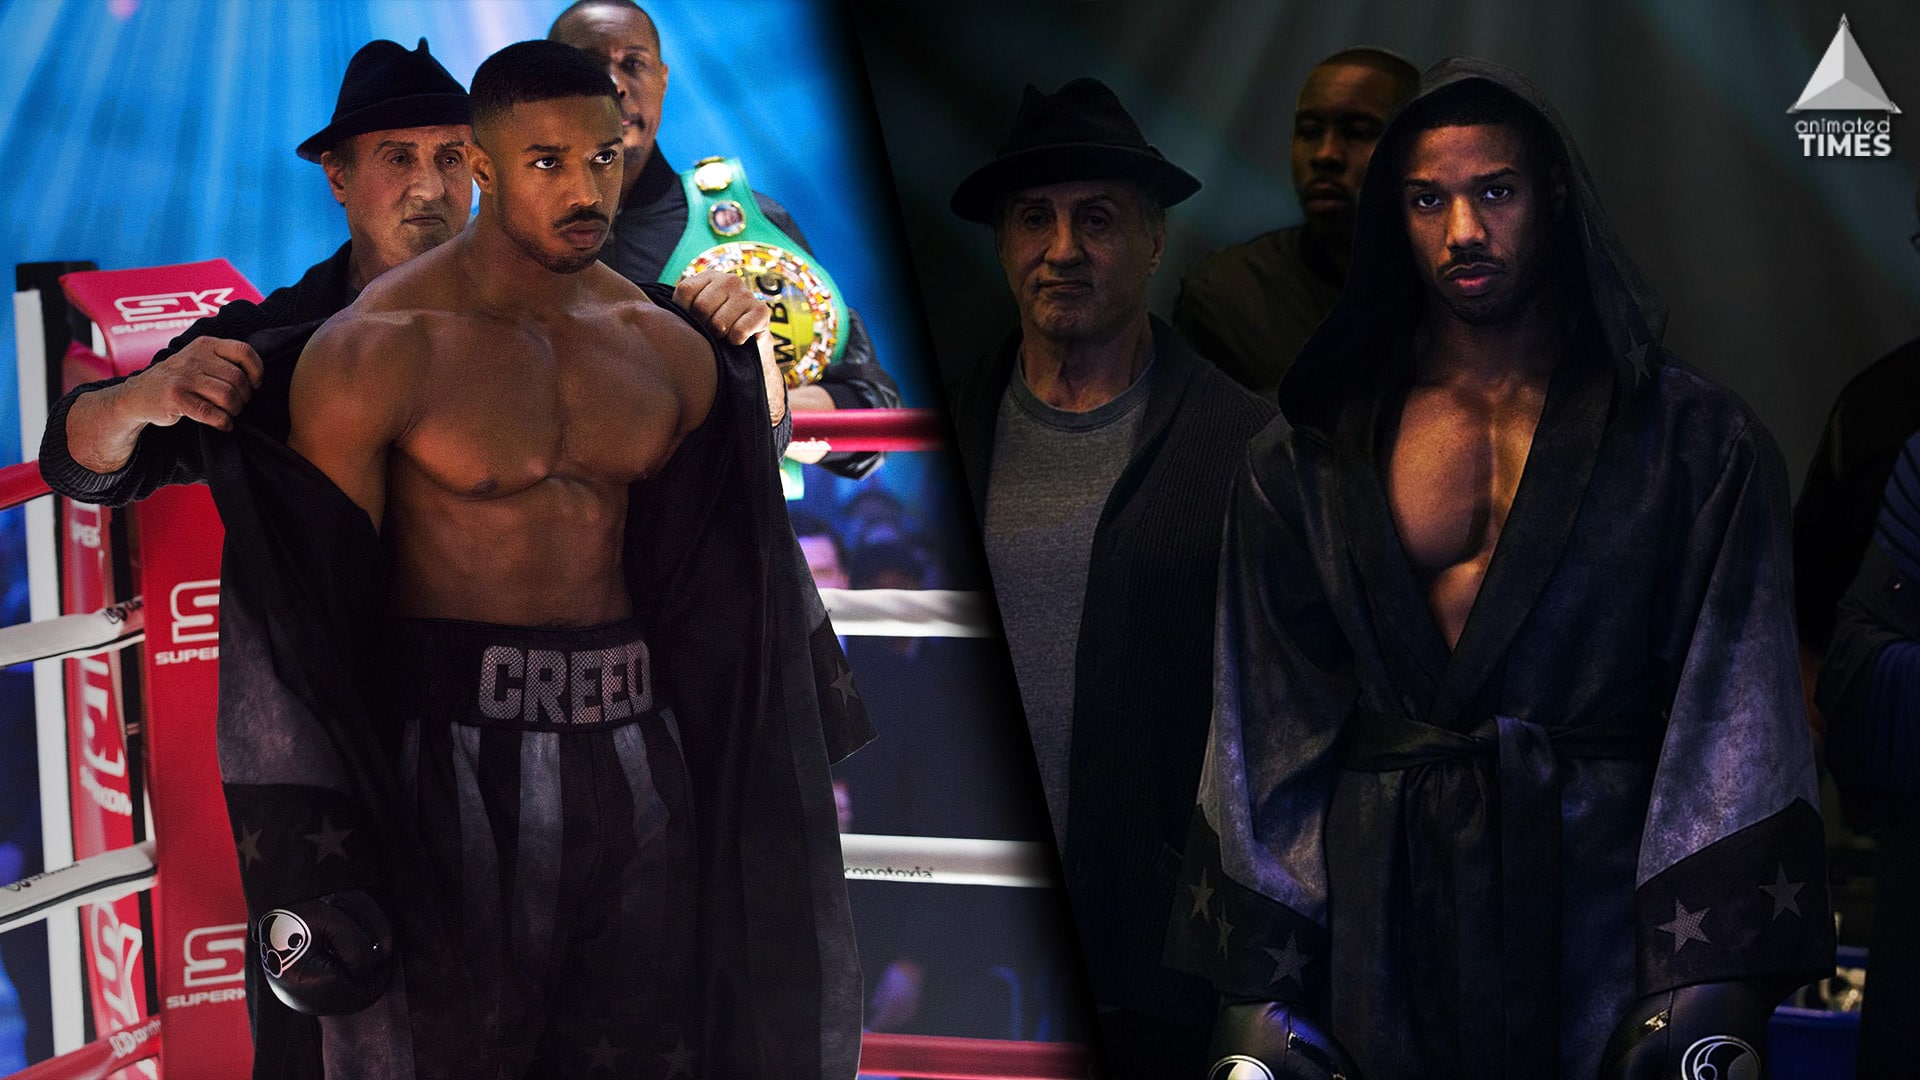 Creed 3: Michael B. Jordan is Set to Direct; Here are the Details